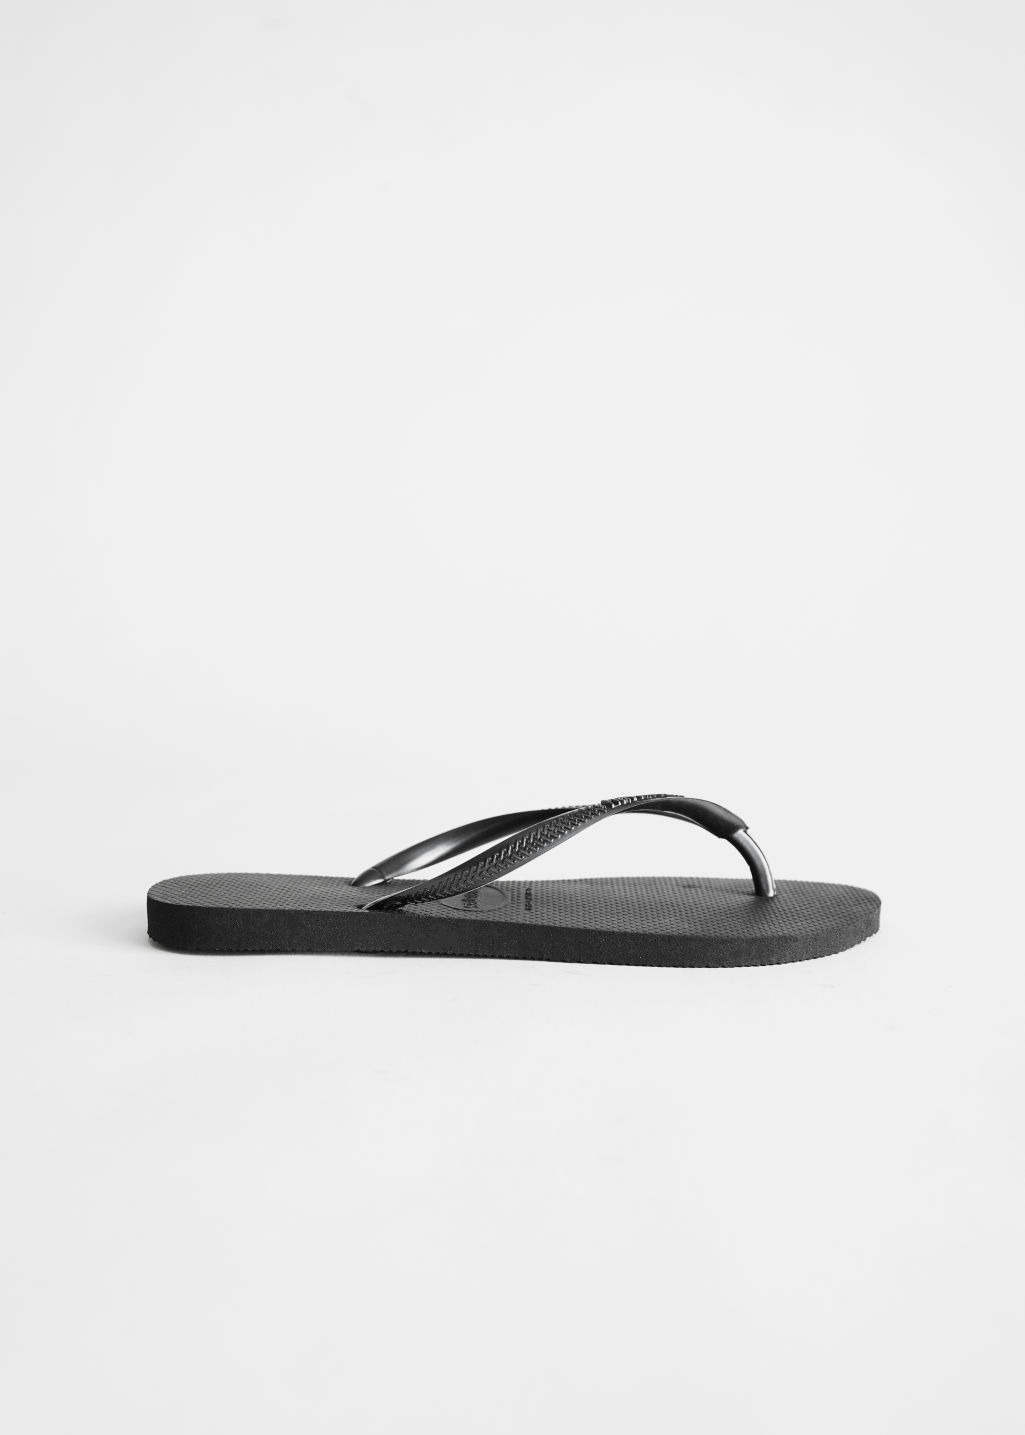 Havaianas Flip Flops - Black - Flat sandals - & Other Stories - Click Image to Close